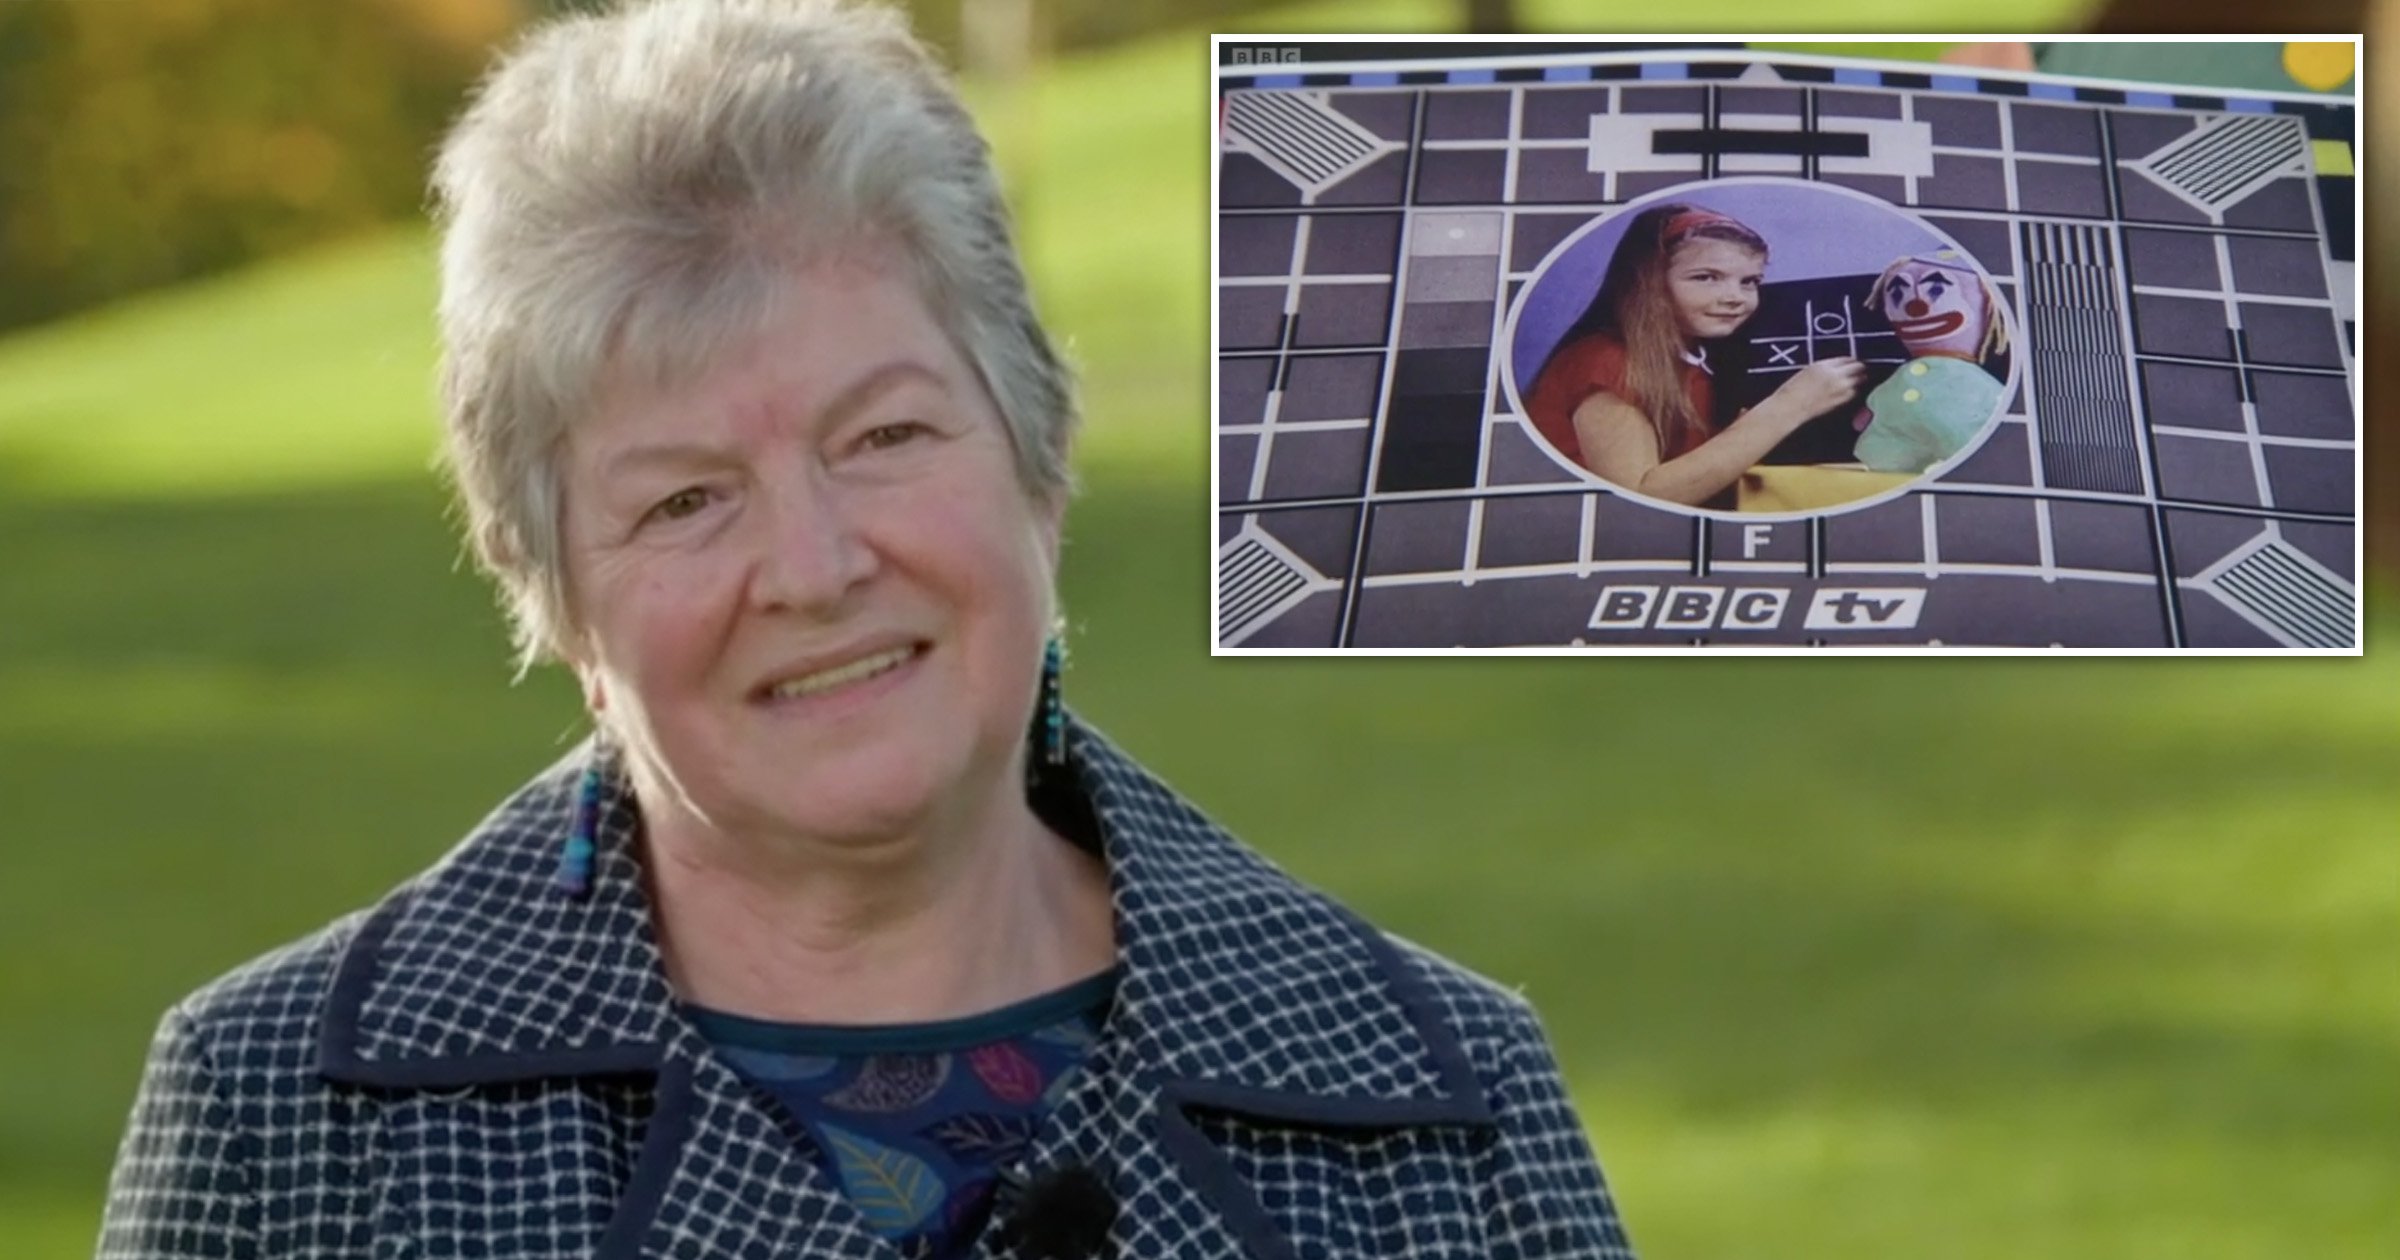 Antiques Roadshow viewers hit with major nostalgia as iconic BBC test card star makes appearance